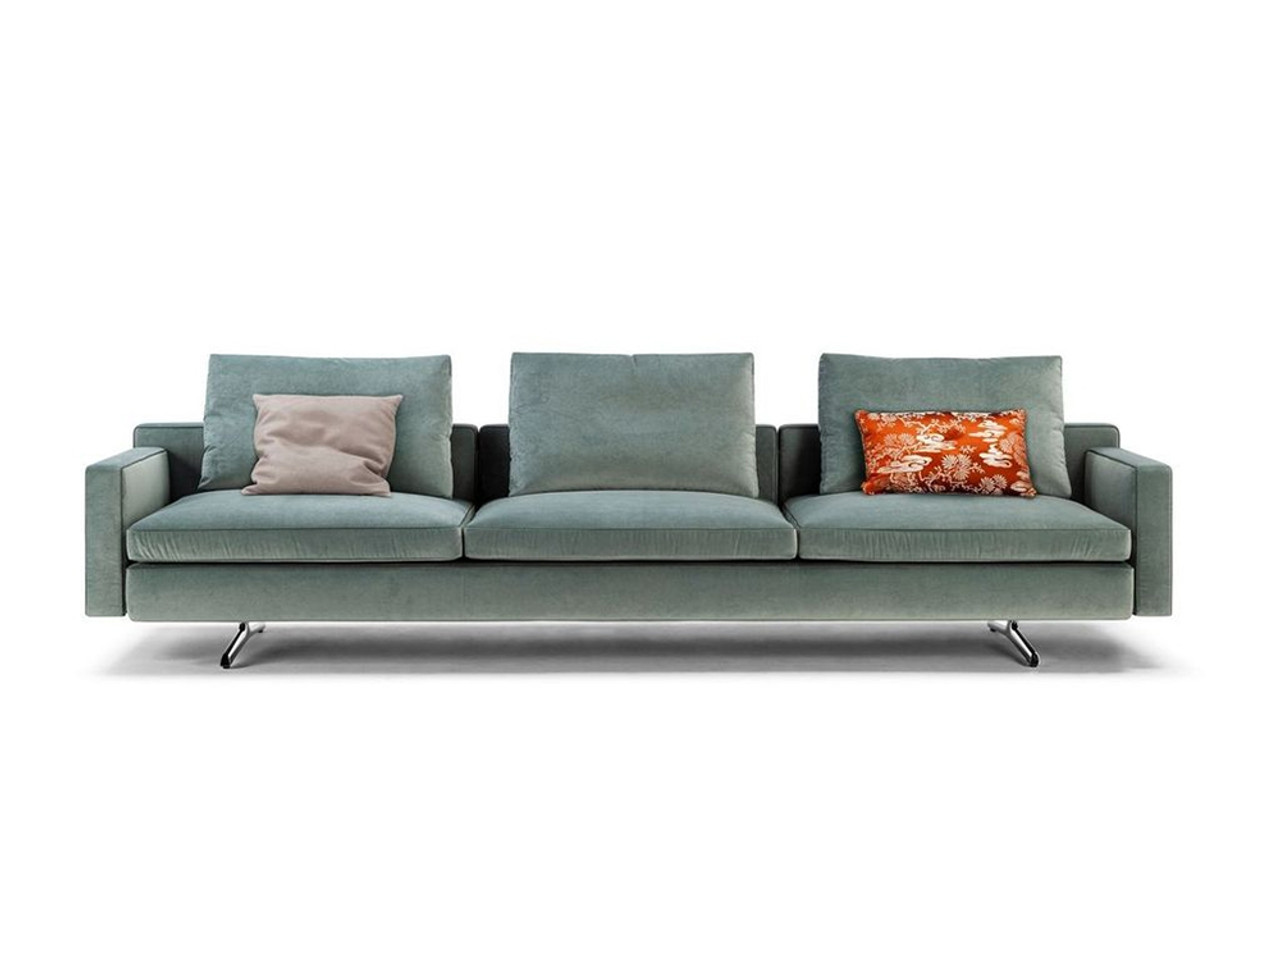 Luxury Seating Redefined: The Poltrona Frau Sofa Collection插图3